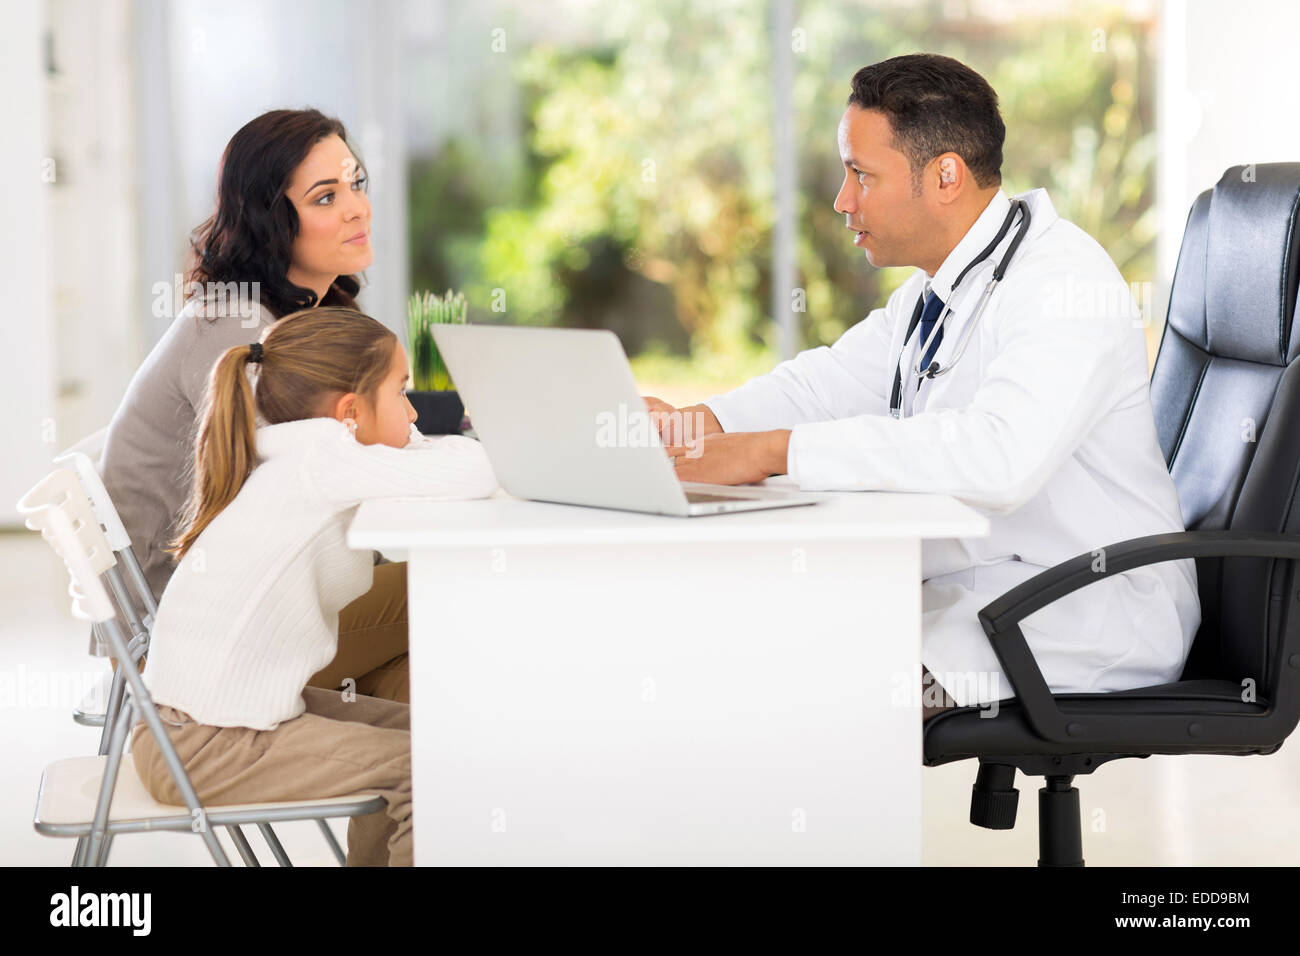 pediatric doctor talking to patient's mother Stock Photo